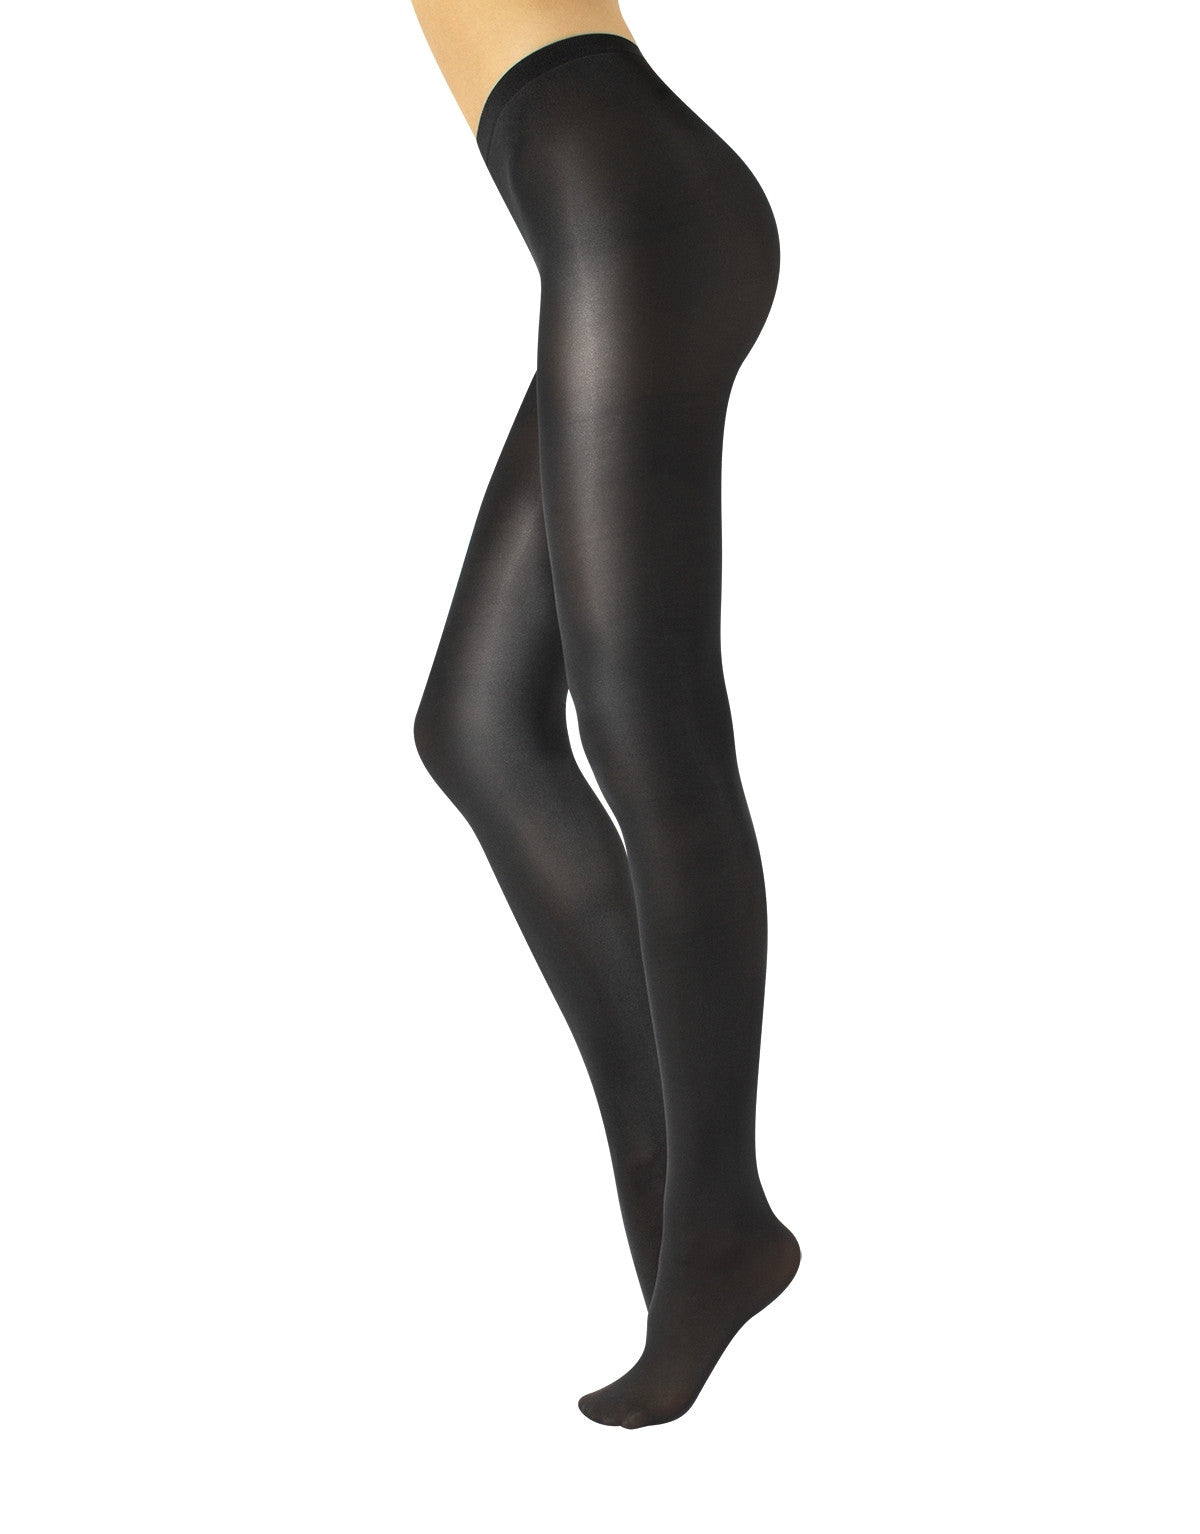 Calzitaly Glossy Tights - Black ultra opaque tights with a shiny satin finish.